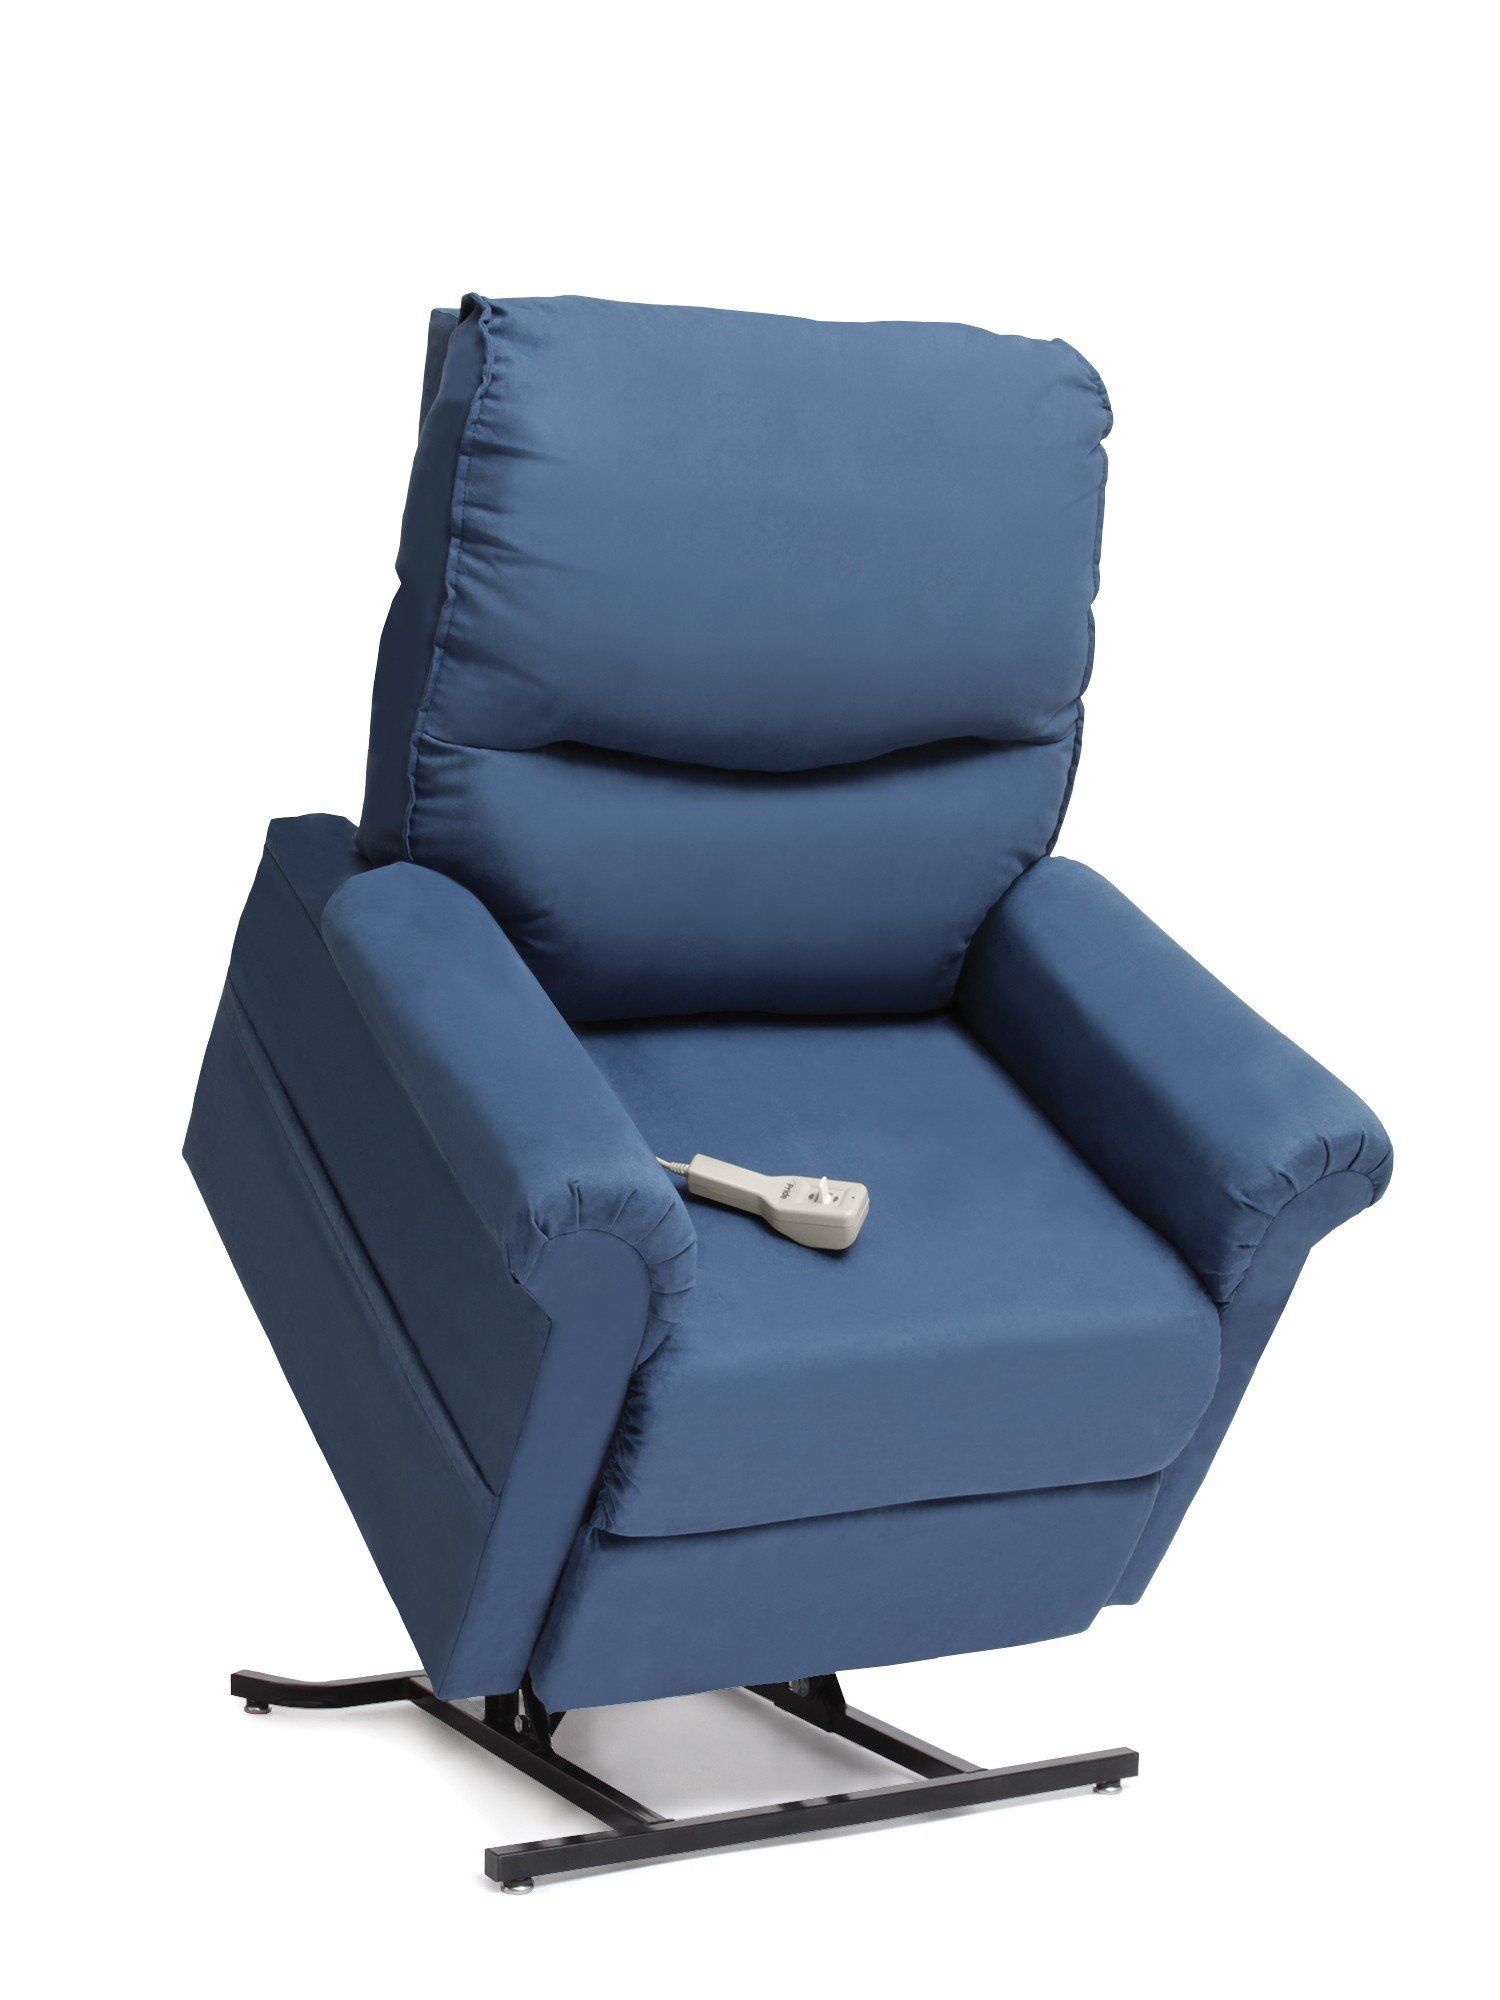 The LC-105 is a 3 position Lift Chair,  has a sewn pillow back that offers comfortable support and is available in 4 stylish micro-suede fabrics.